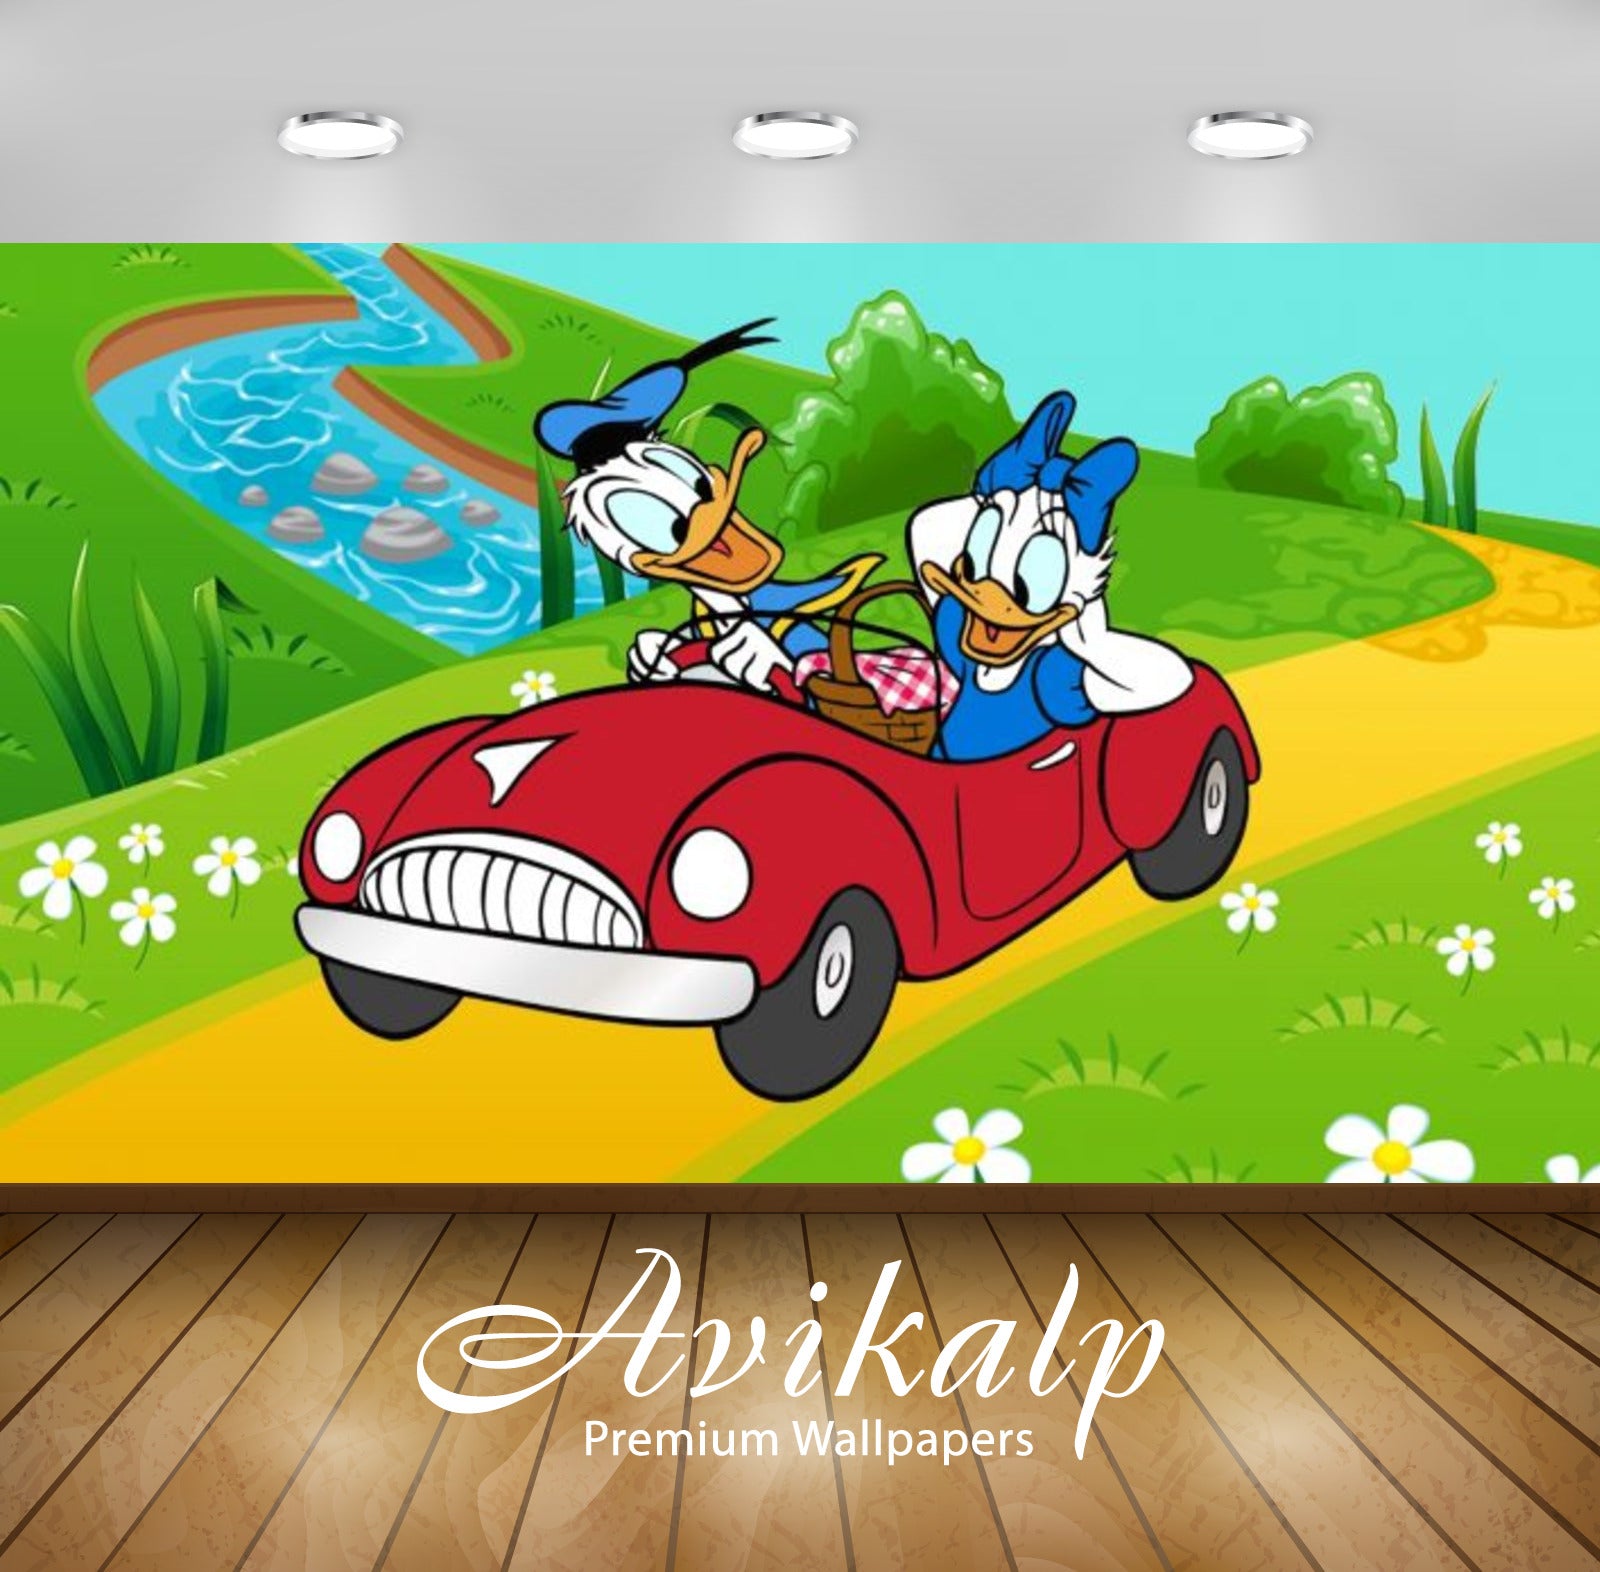 Avikalp Exclusive Awi2065 Donald And Daisy Duck Walk Ride Car Picnic  Full HD Wallpapers for Living